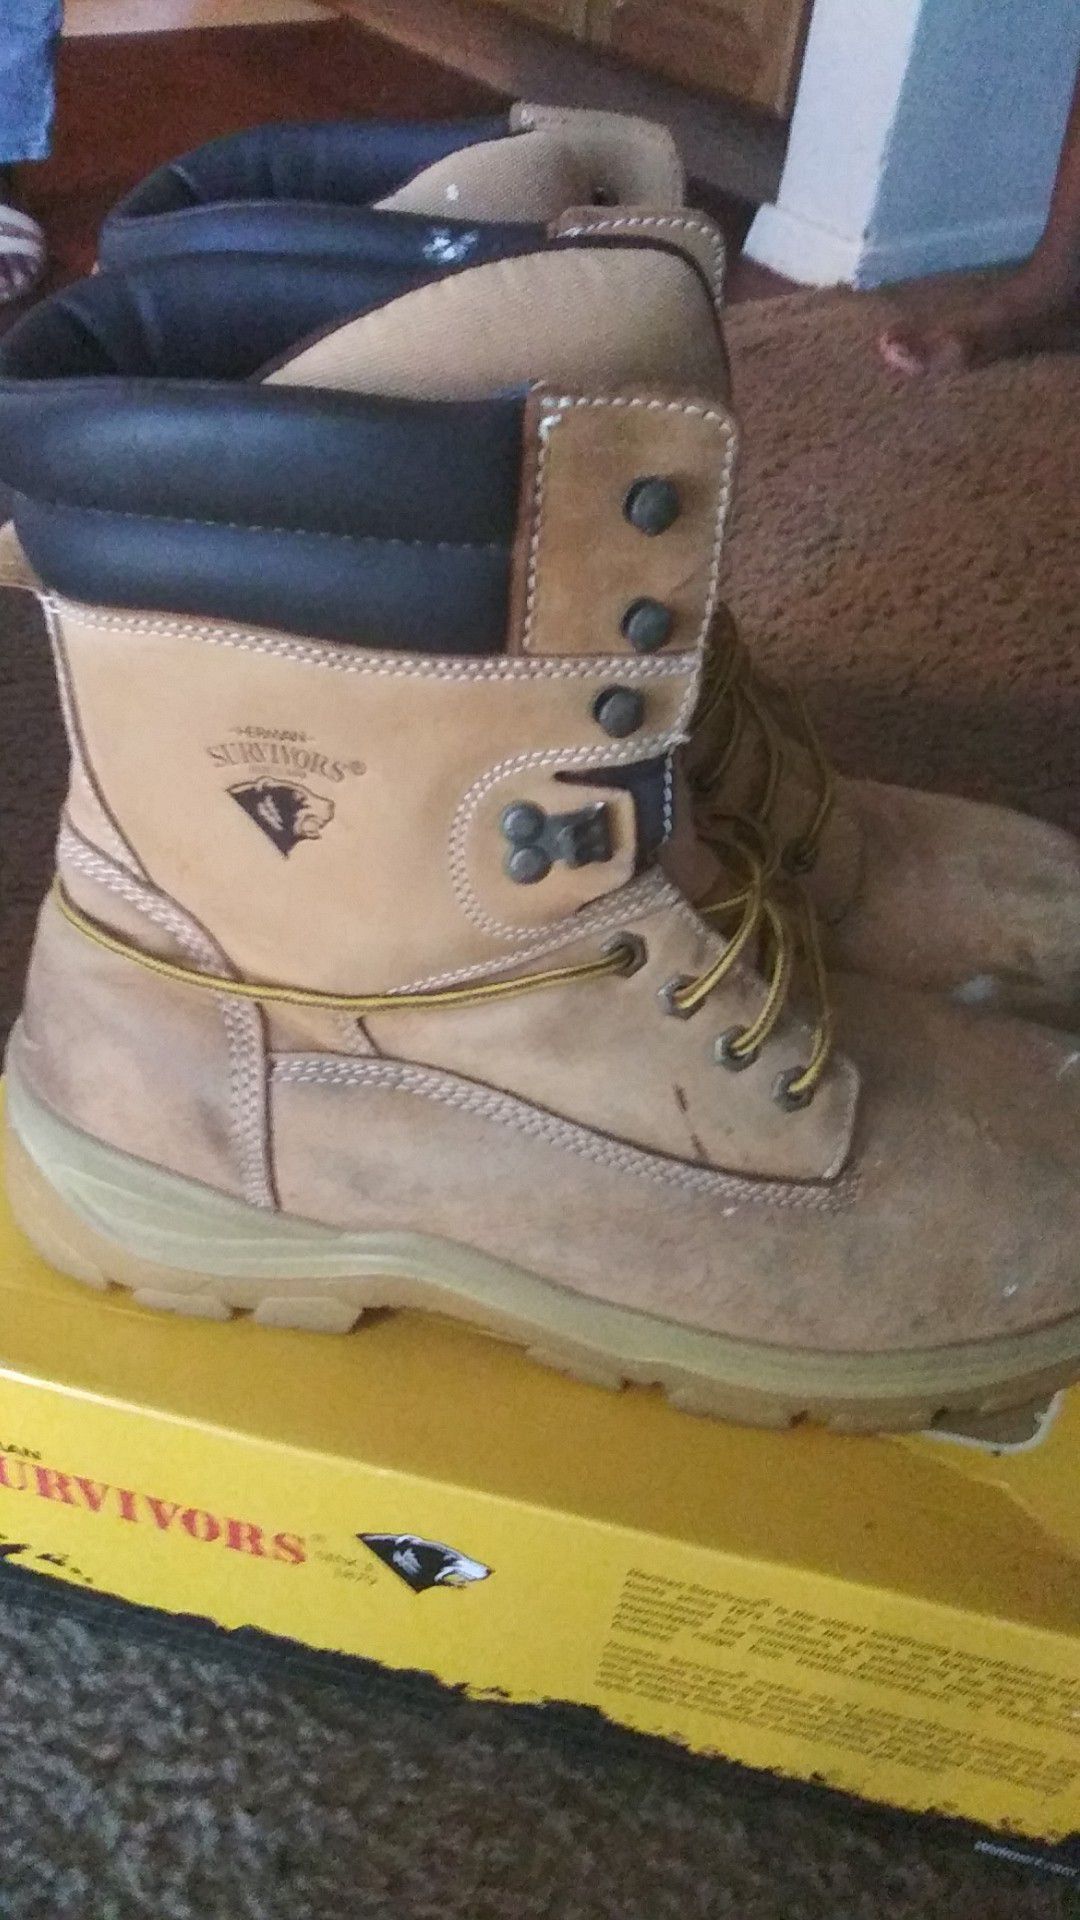 Herman Survivors Steel Toe Work Boots asking 20$ size 13 in Fair Condition